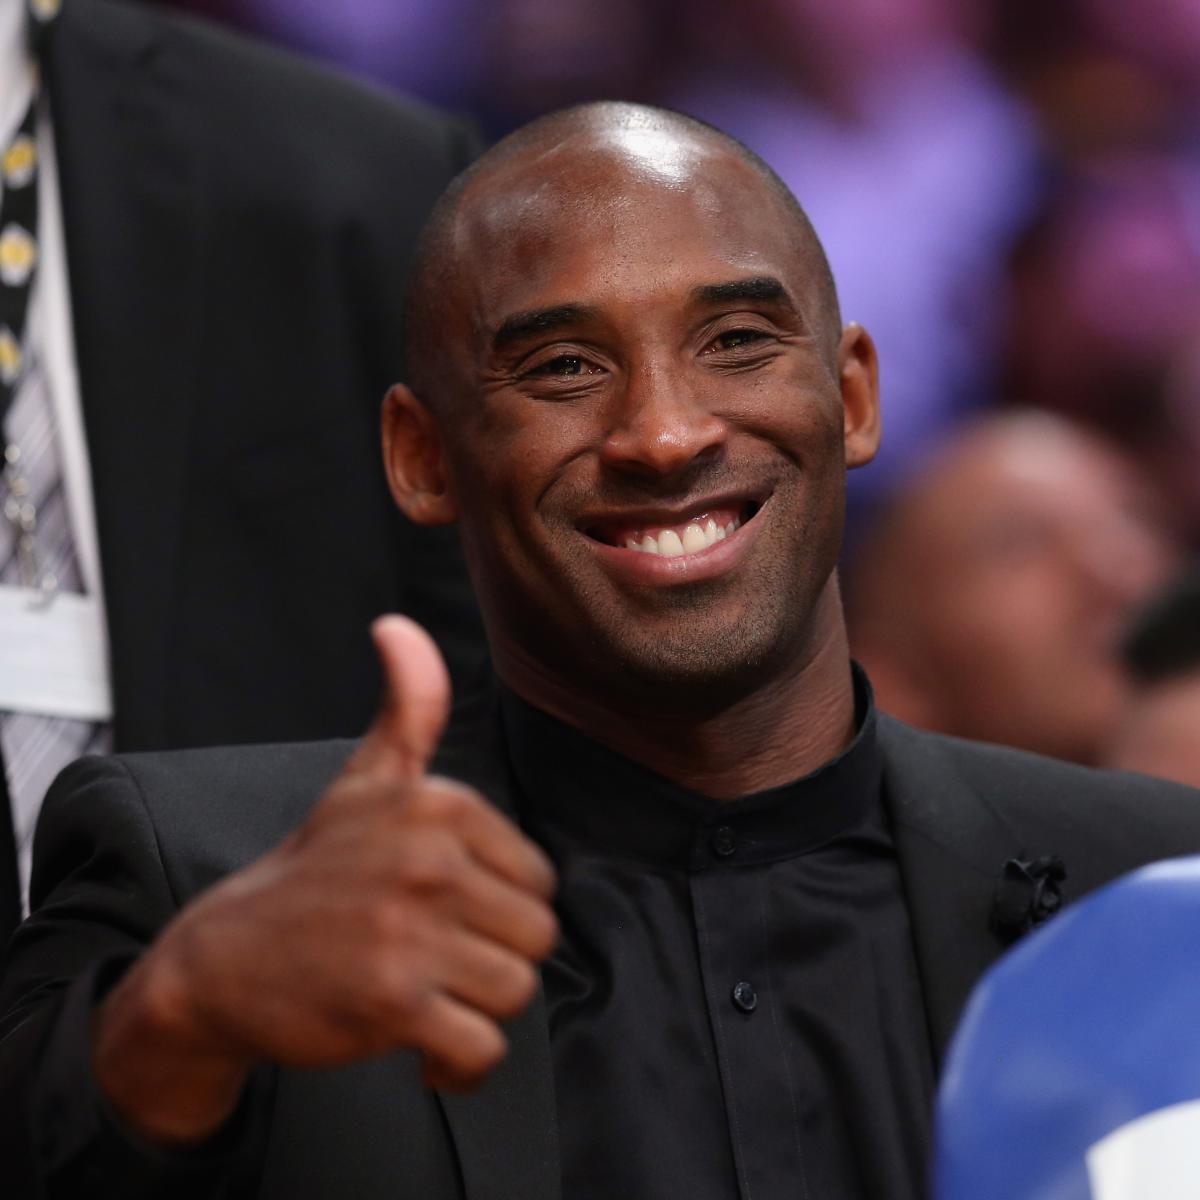 hi-res-186260052-kobe-bryant-of-the-los-angeles-lakers-reacts-to-someone_crop_exact.jpg